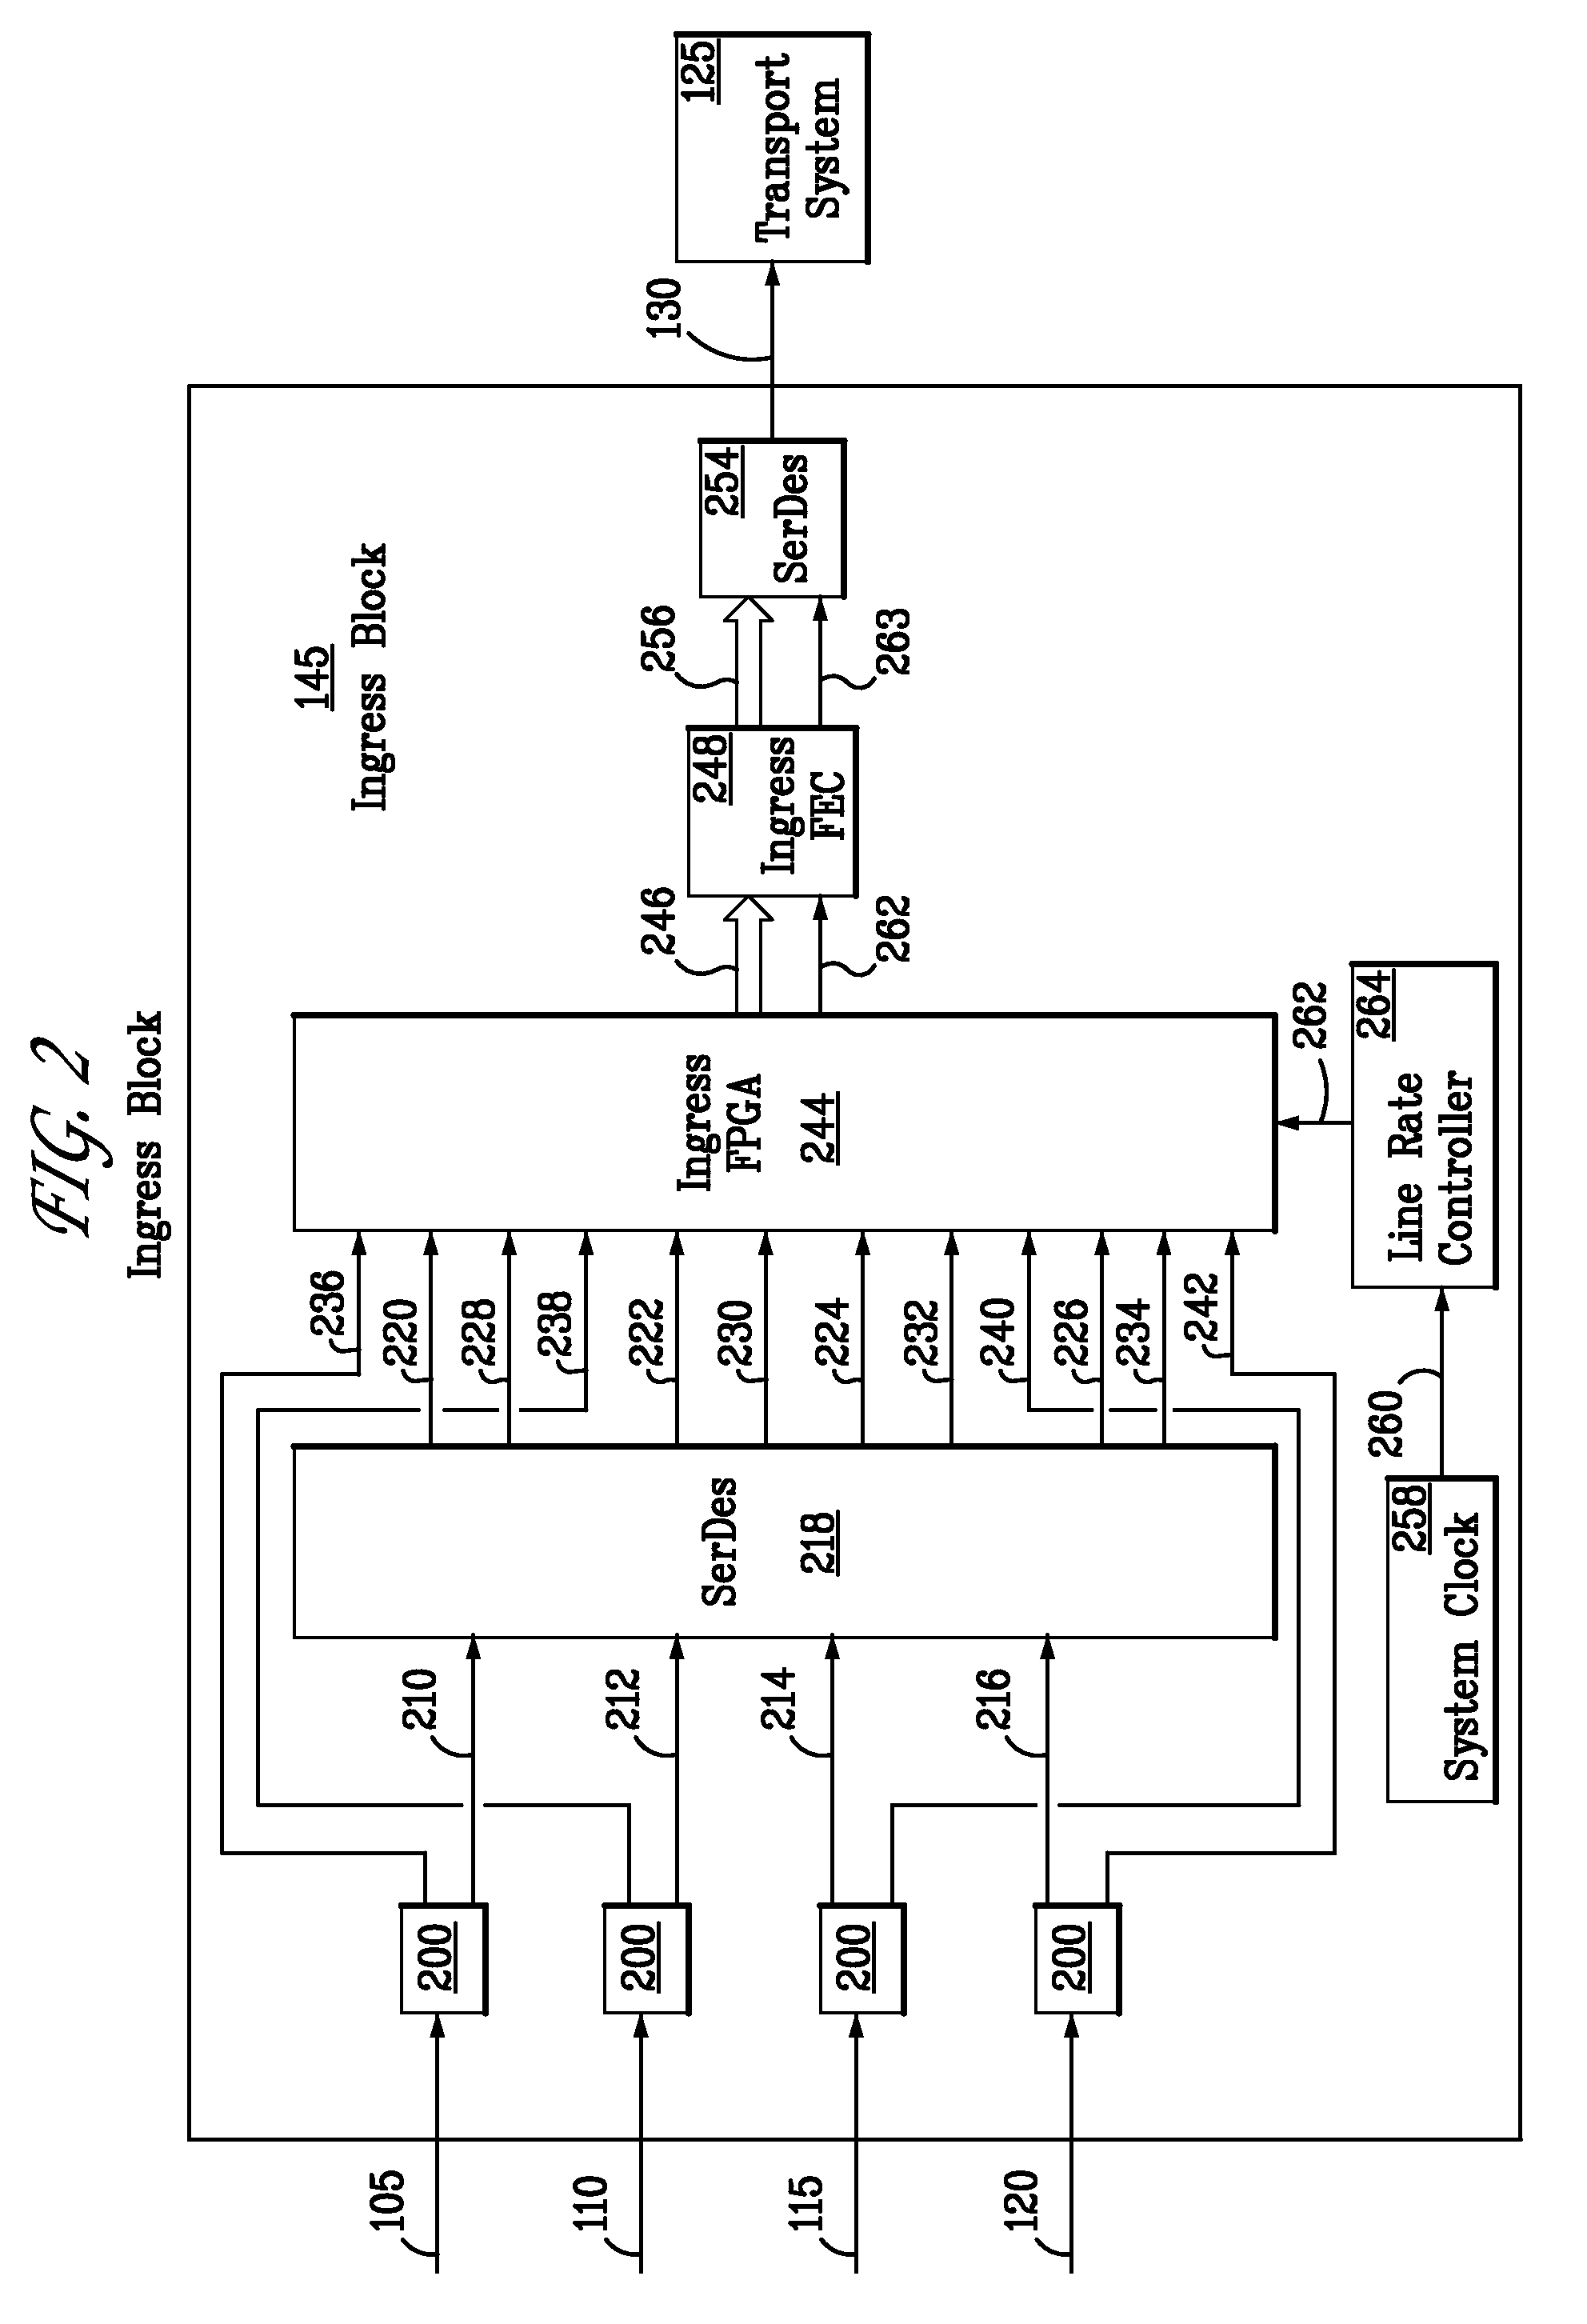 Apparatus and method for aggregation and transportation of gigabit ethernet and other packet based data formats